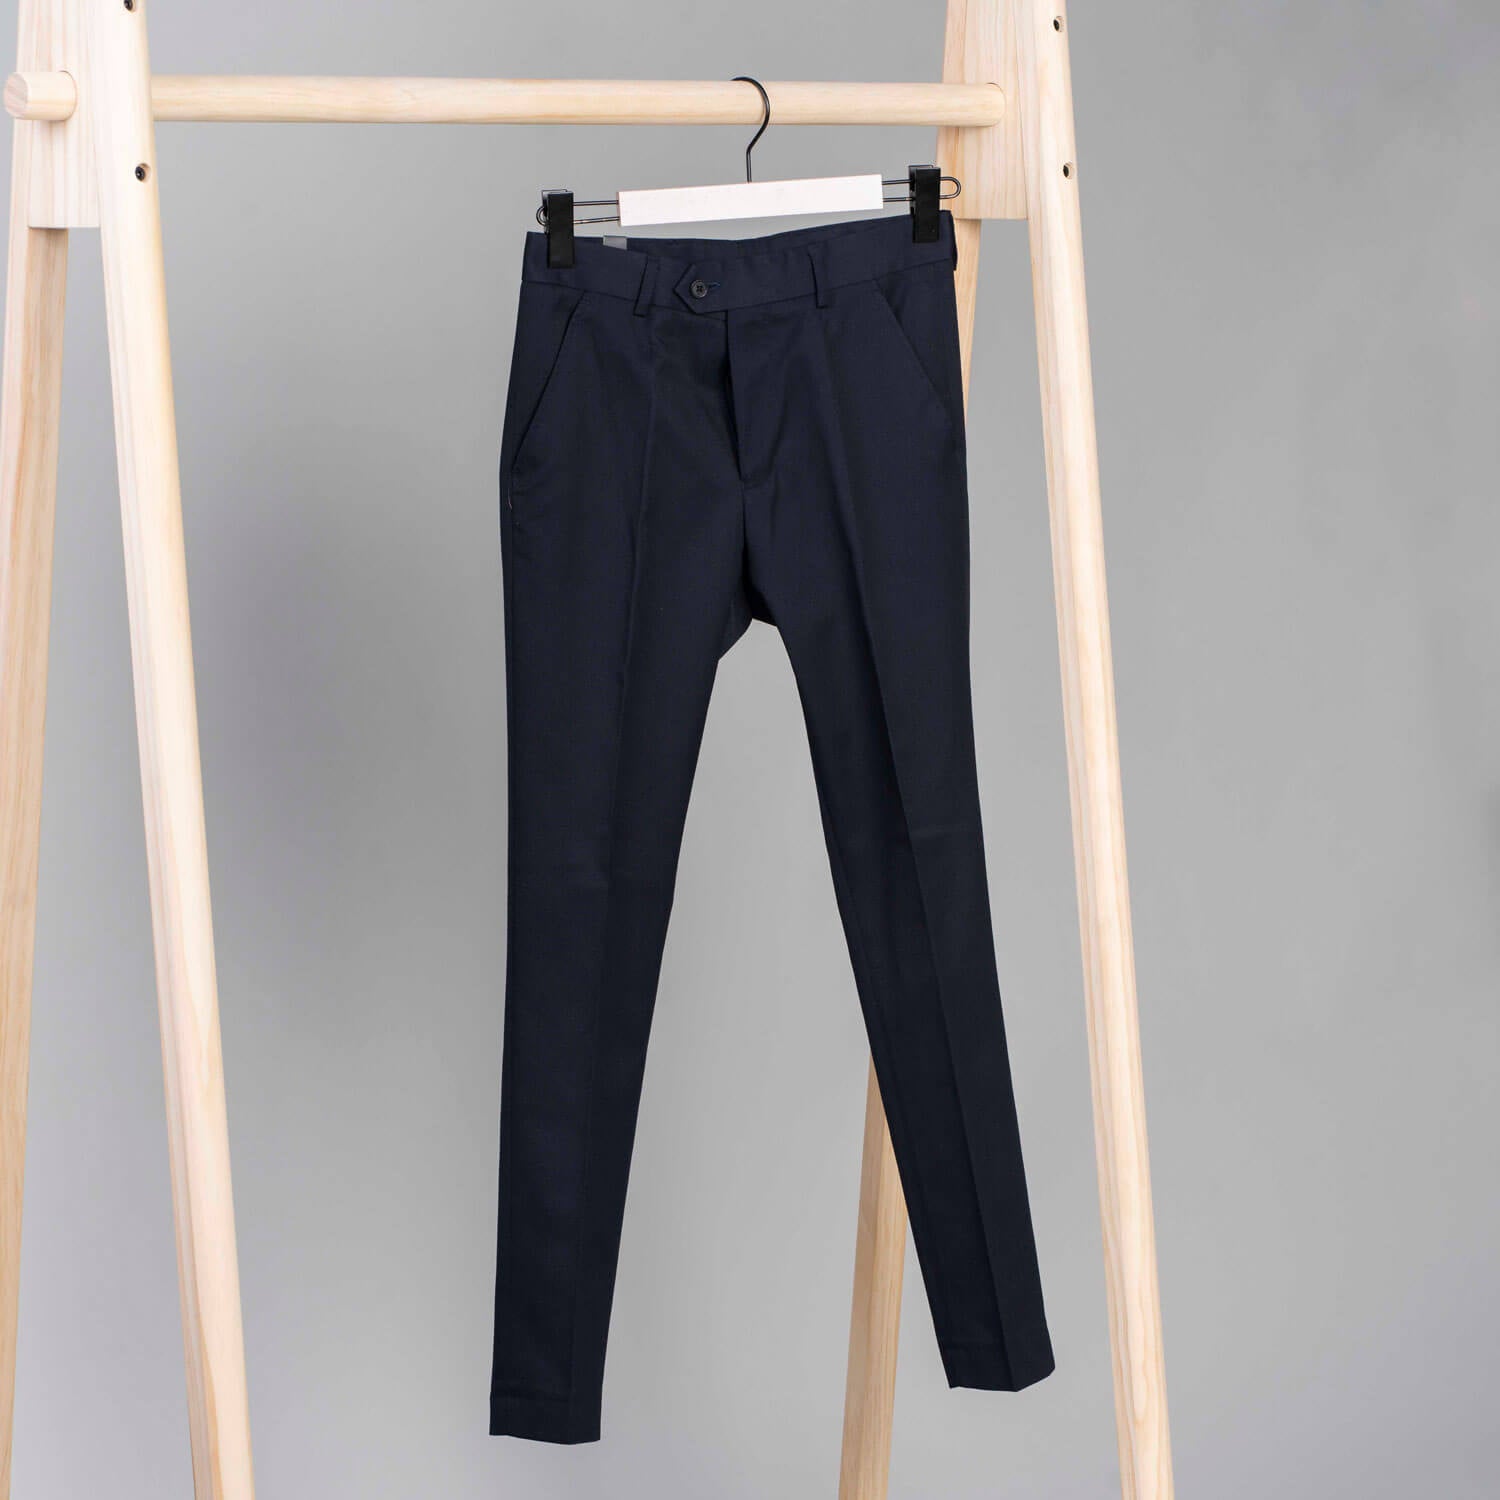 Blue Dot Boys Slimfit Trousers - Navy 1 Shaws Department Stores